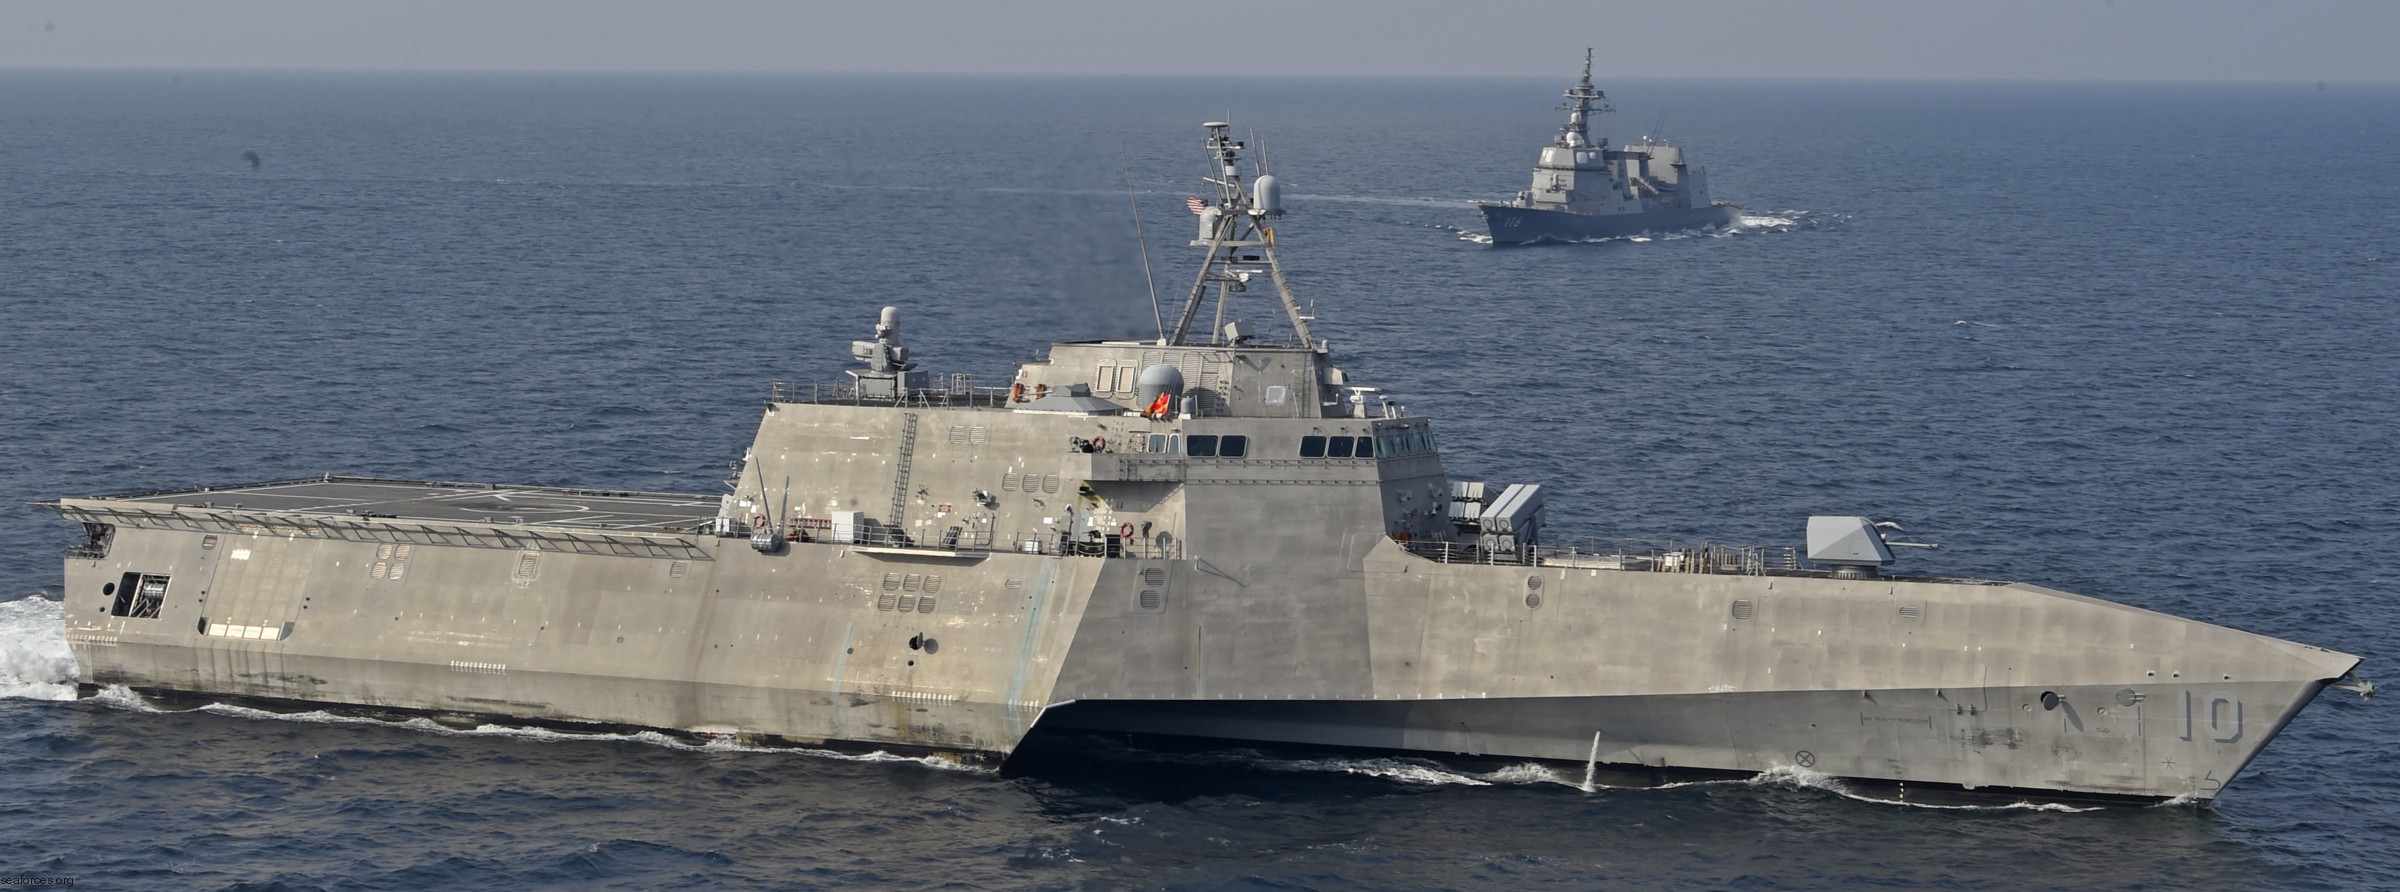 lcs-10 uss gabrielle giffords littoral combat ship independence class us navy 39 andaman sea